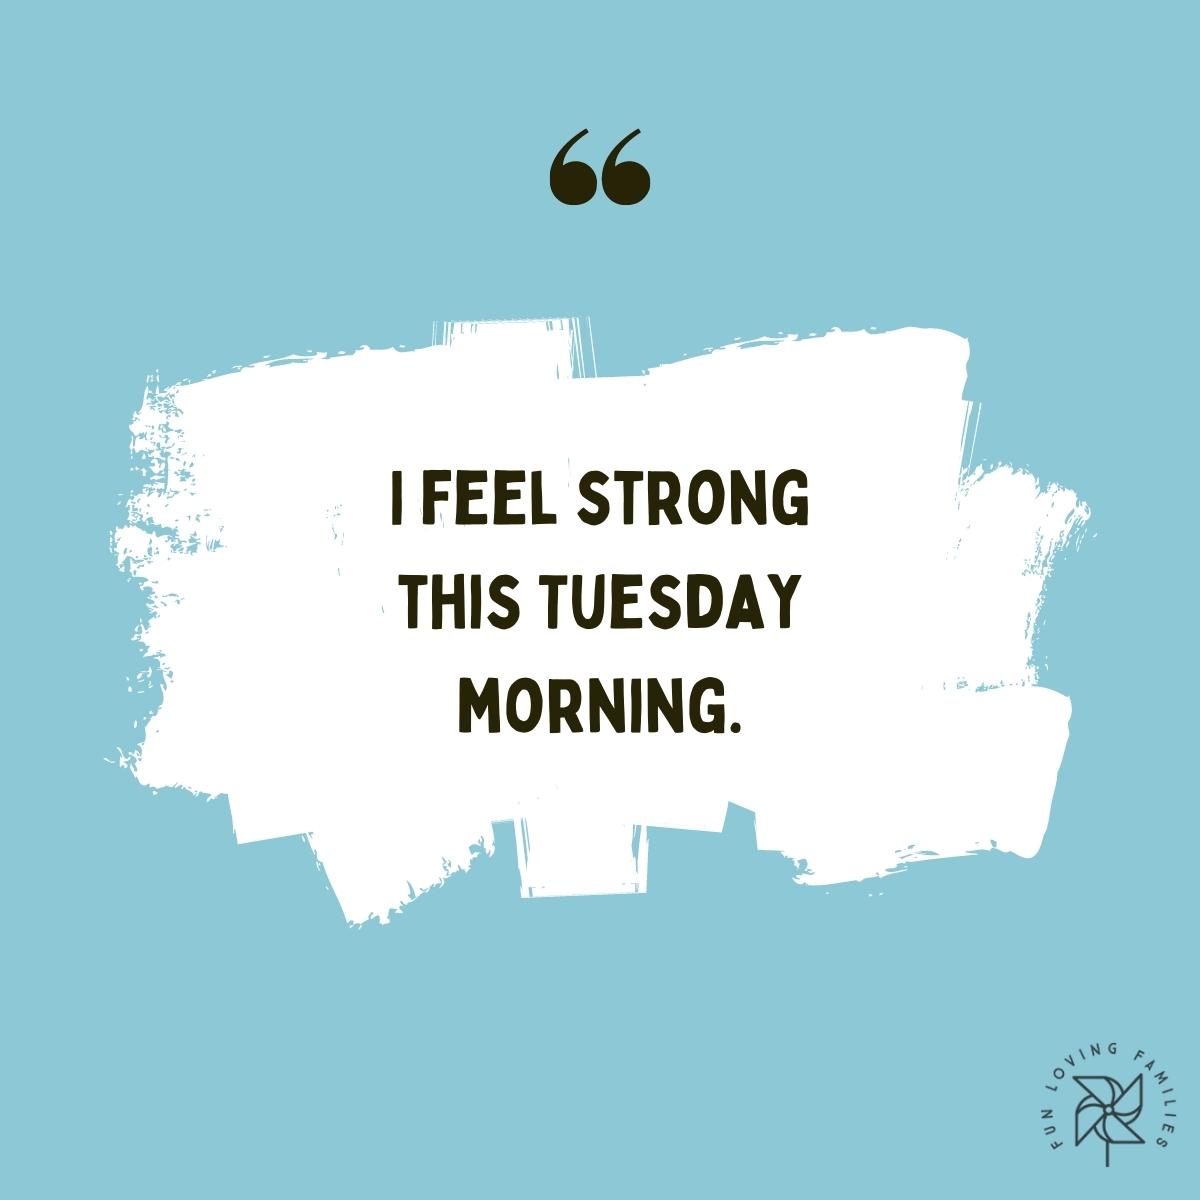 I feel strong this Tuesday morning affirmation image